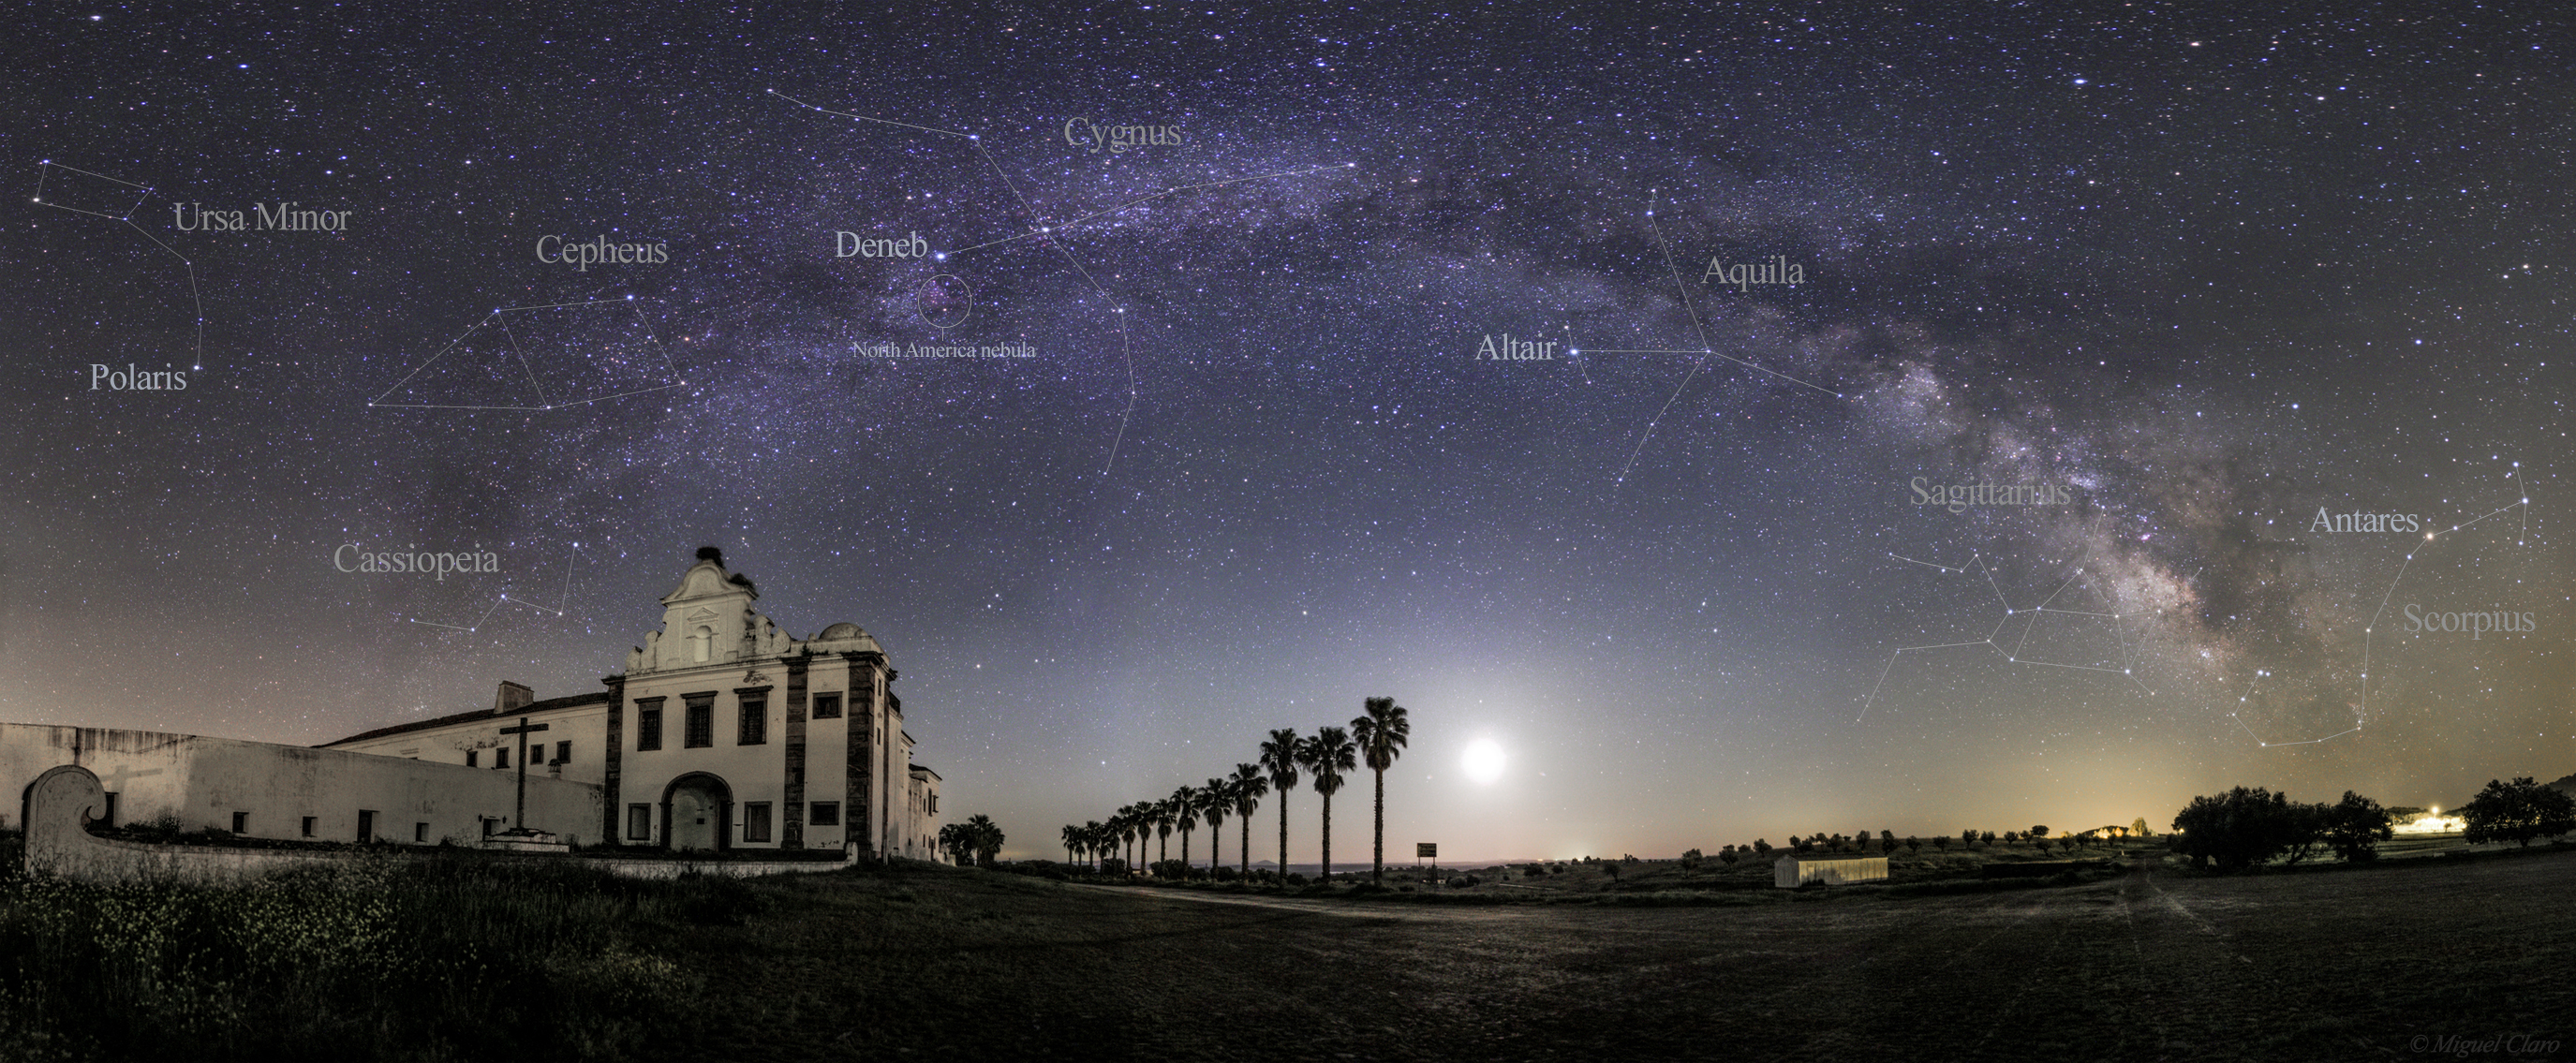 General 2750x1135 nature landscape Milky Way night stars starry night panorama palm trees Portugal cathedral Moon moonlight constellations trees Miguel Claro field photo manipulation low light